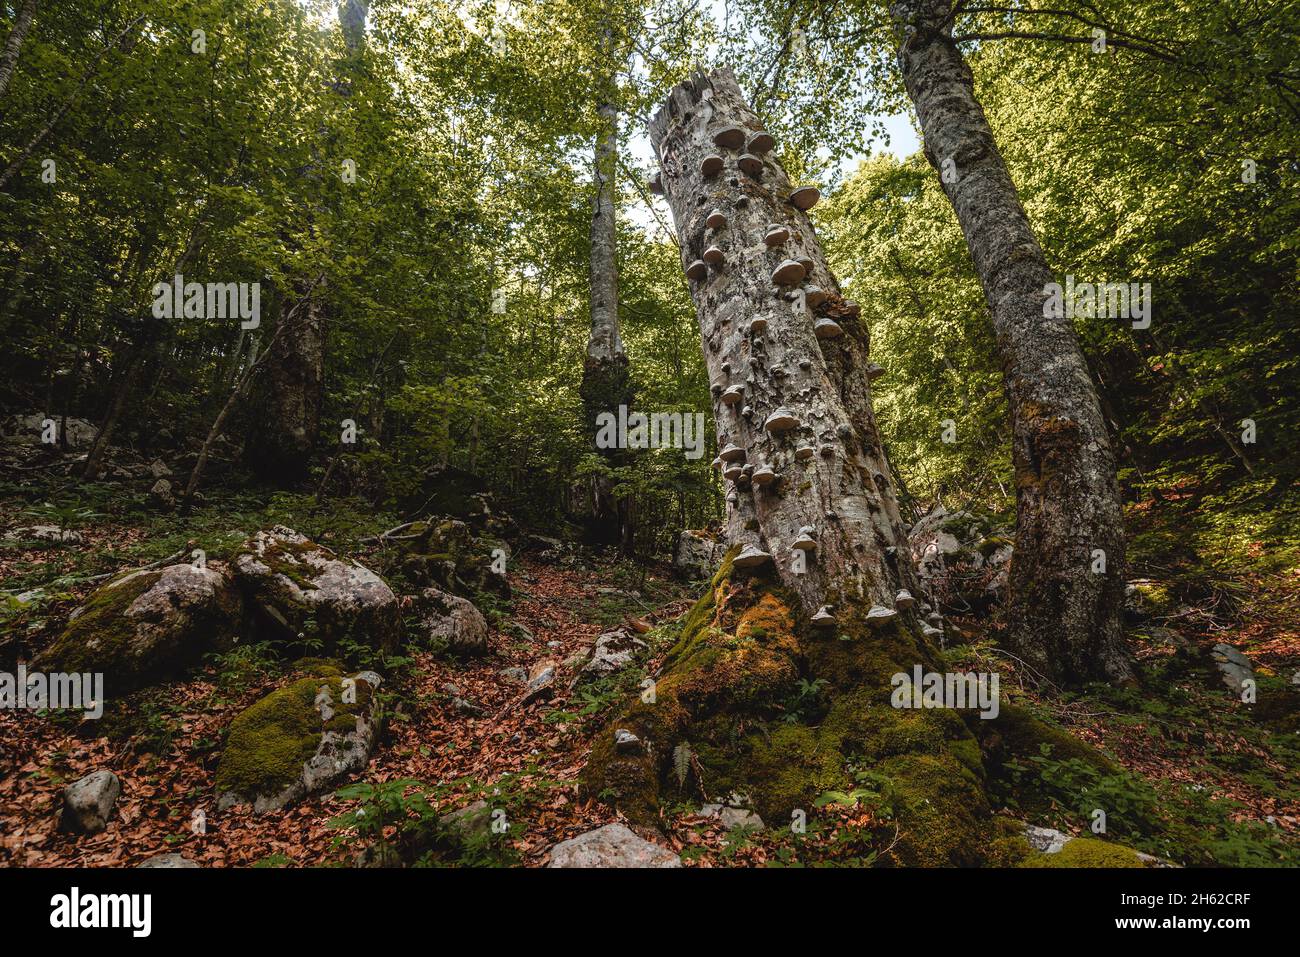 tree stump overgrown with tree fungi and moss stretches towards the canopy of a forest,montenegro,prokletije national park Stock Photo